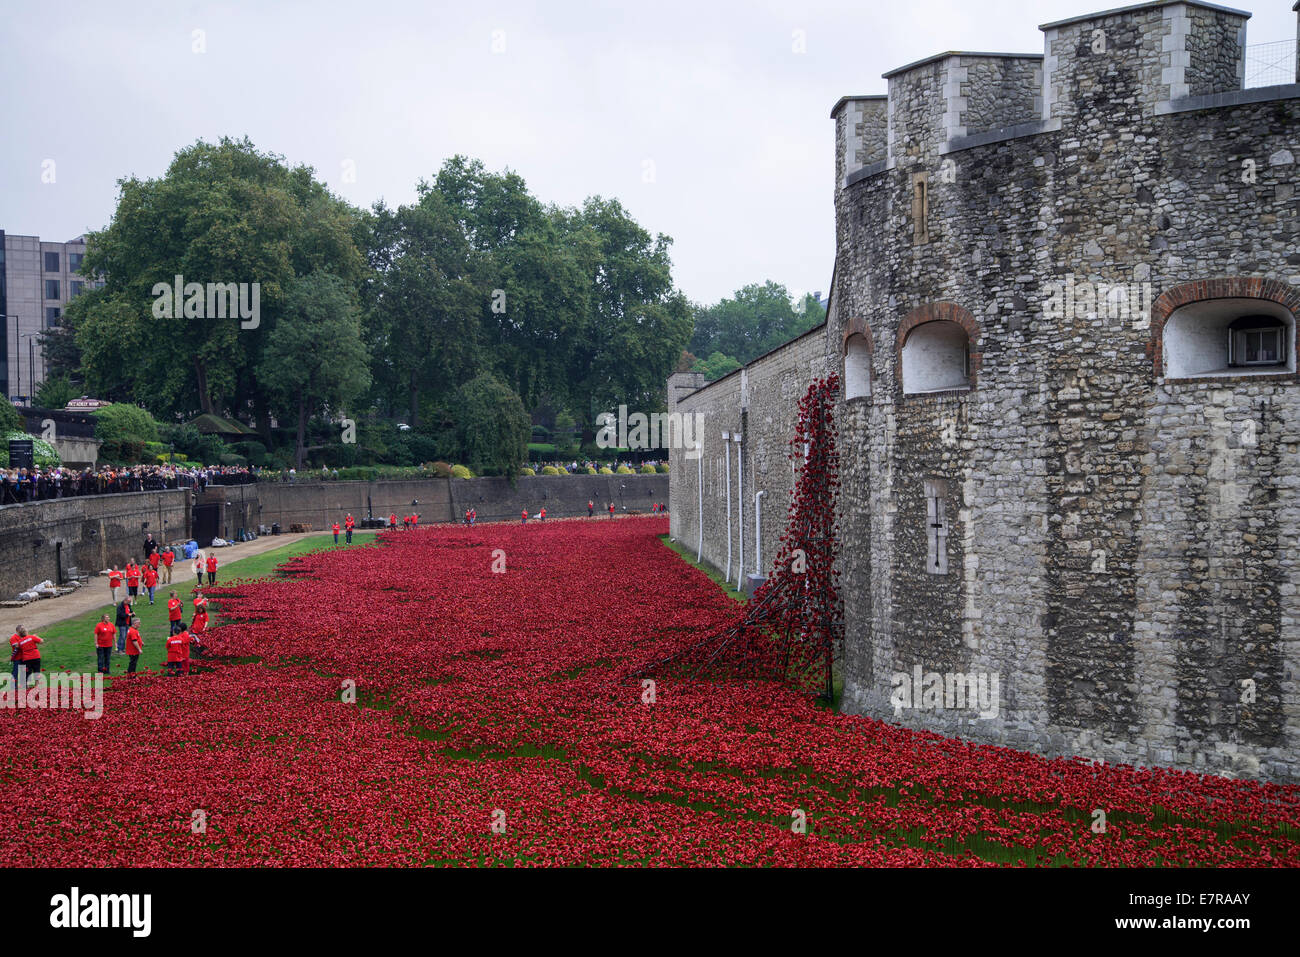 September 2014: Poppies Bleed from a bastion window into the moat at the Tower of London, with volunteers adding new poppies. Stock Photo